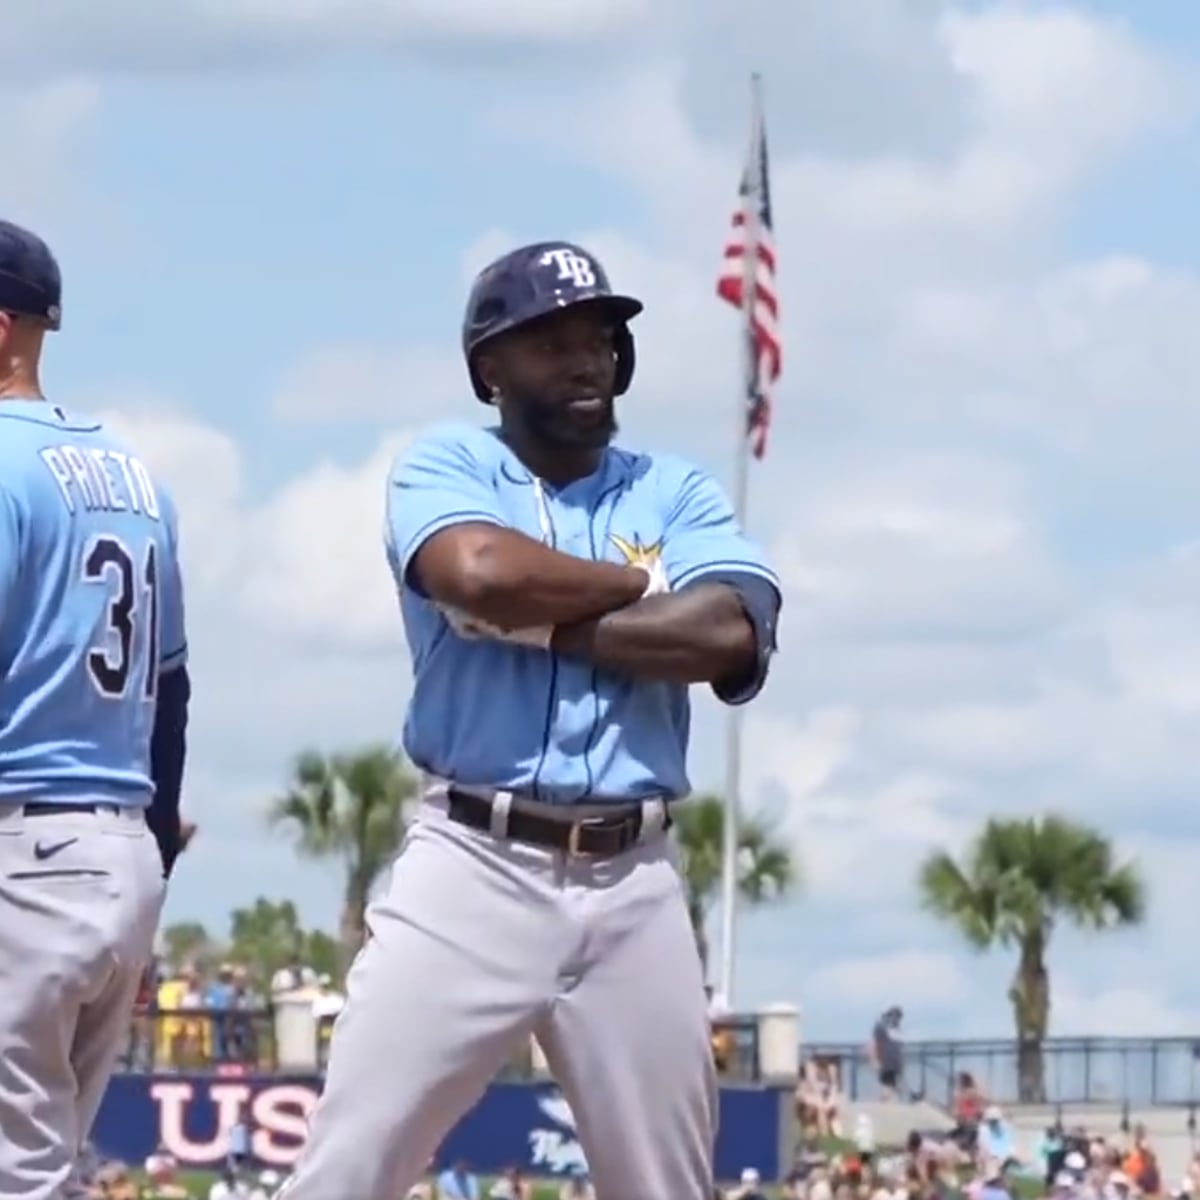 Rays beat Tigers on opening day, just as they planned